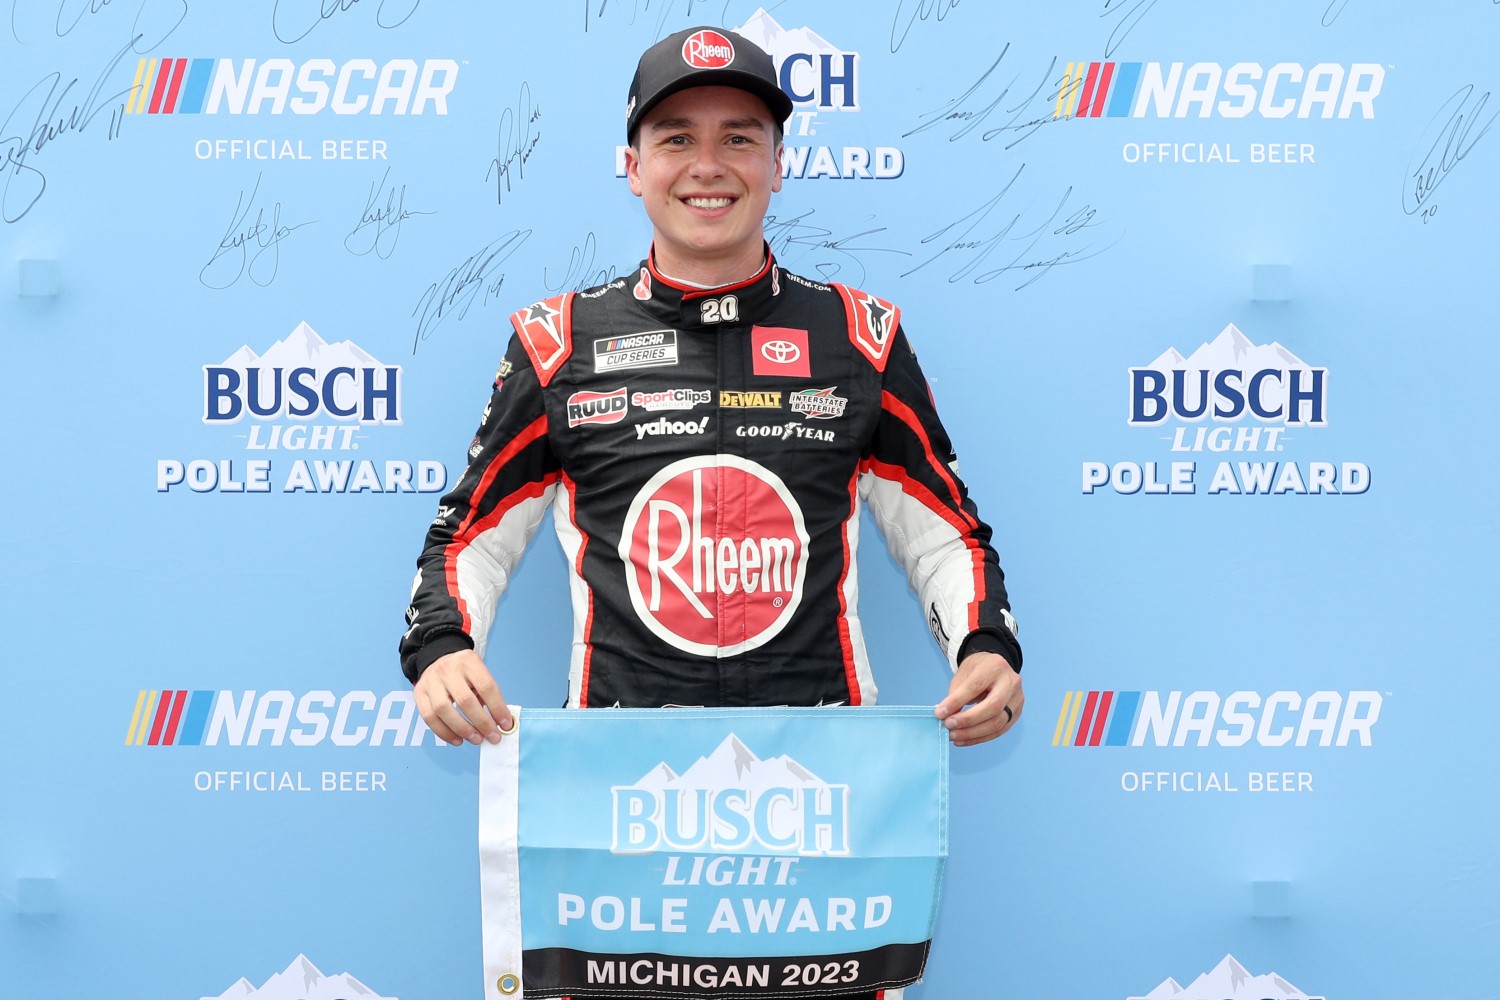 Christopher Bell, driver of the #20 Rheem Toyota, poses for photos after winning the pole award during qualifying for the NASCAR Cup Series FireKeepers Casino 400 at Michigan International Speedway on August 05, 2023 in Brooklyn, Michigan. (Photo by Meg Oliphant/Getty Images)